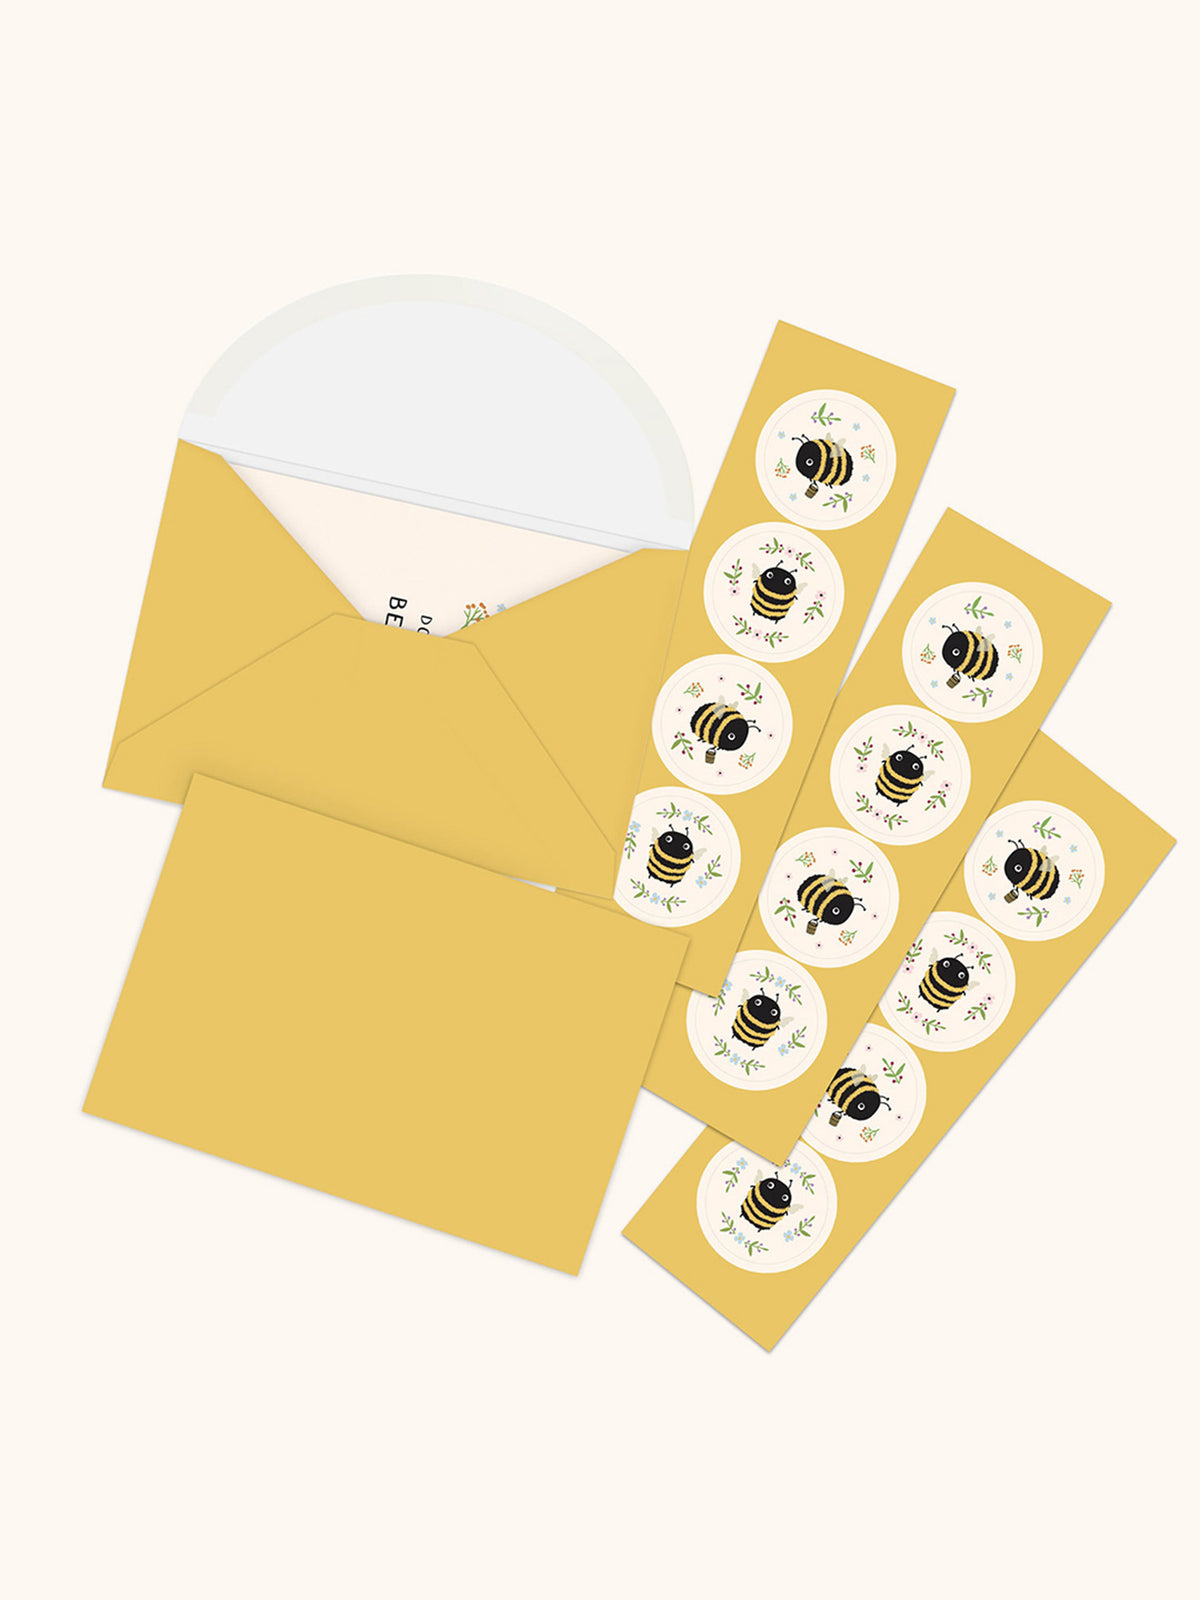 Buzzy Bees Note Card Set with Stickers